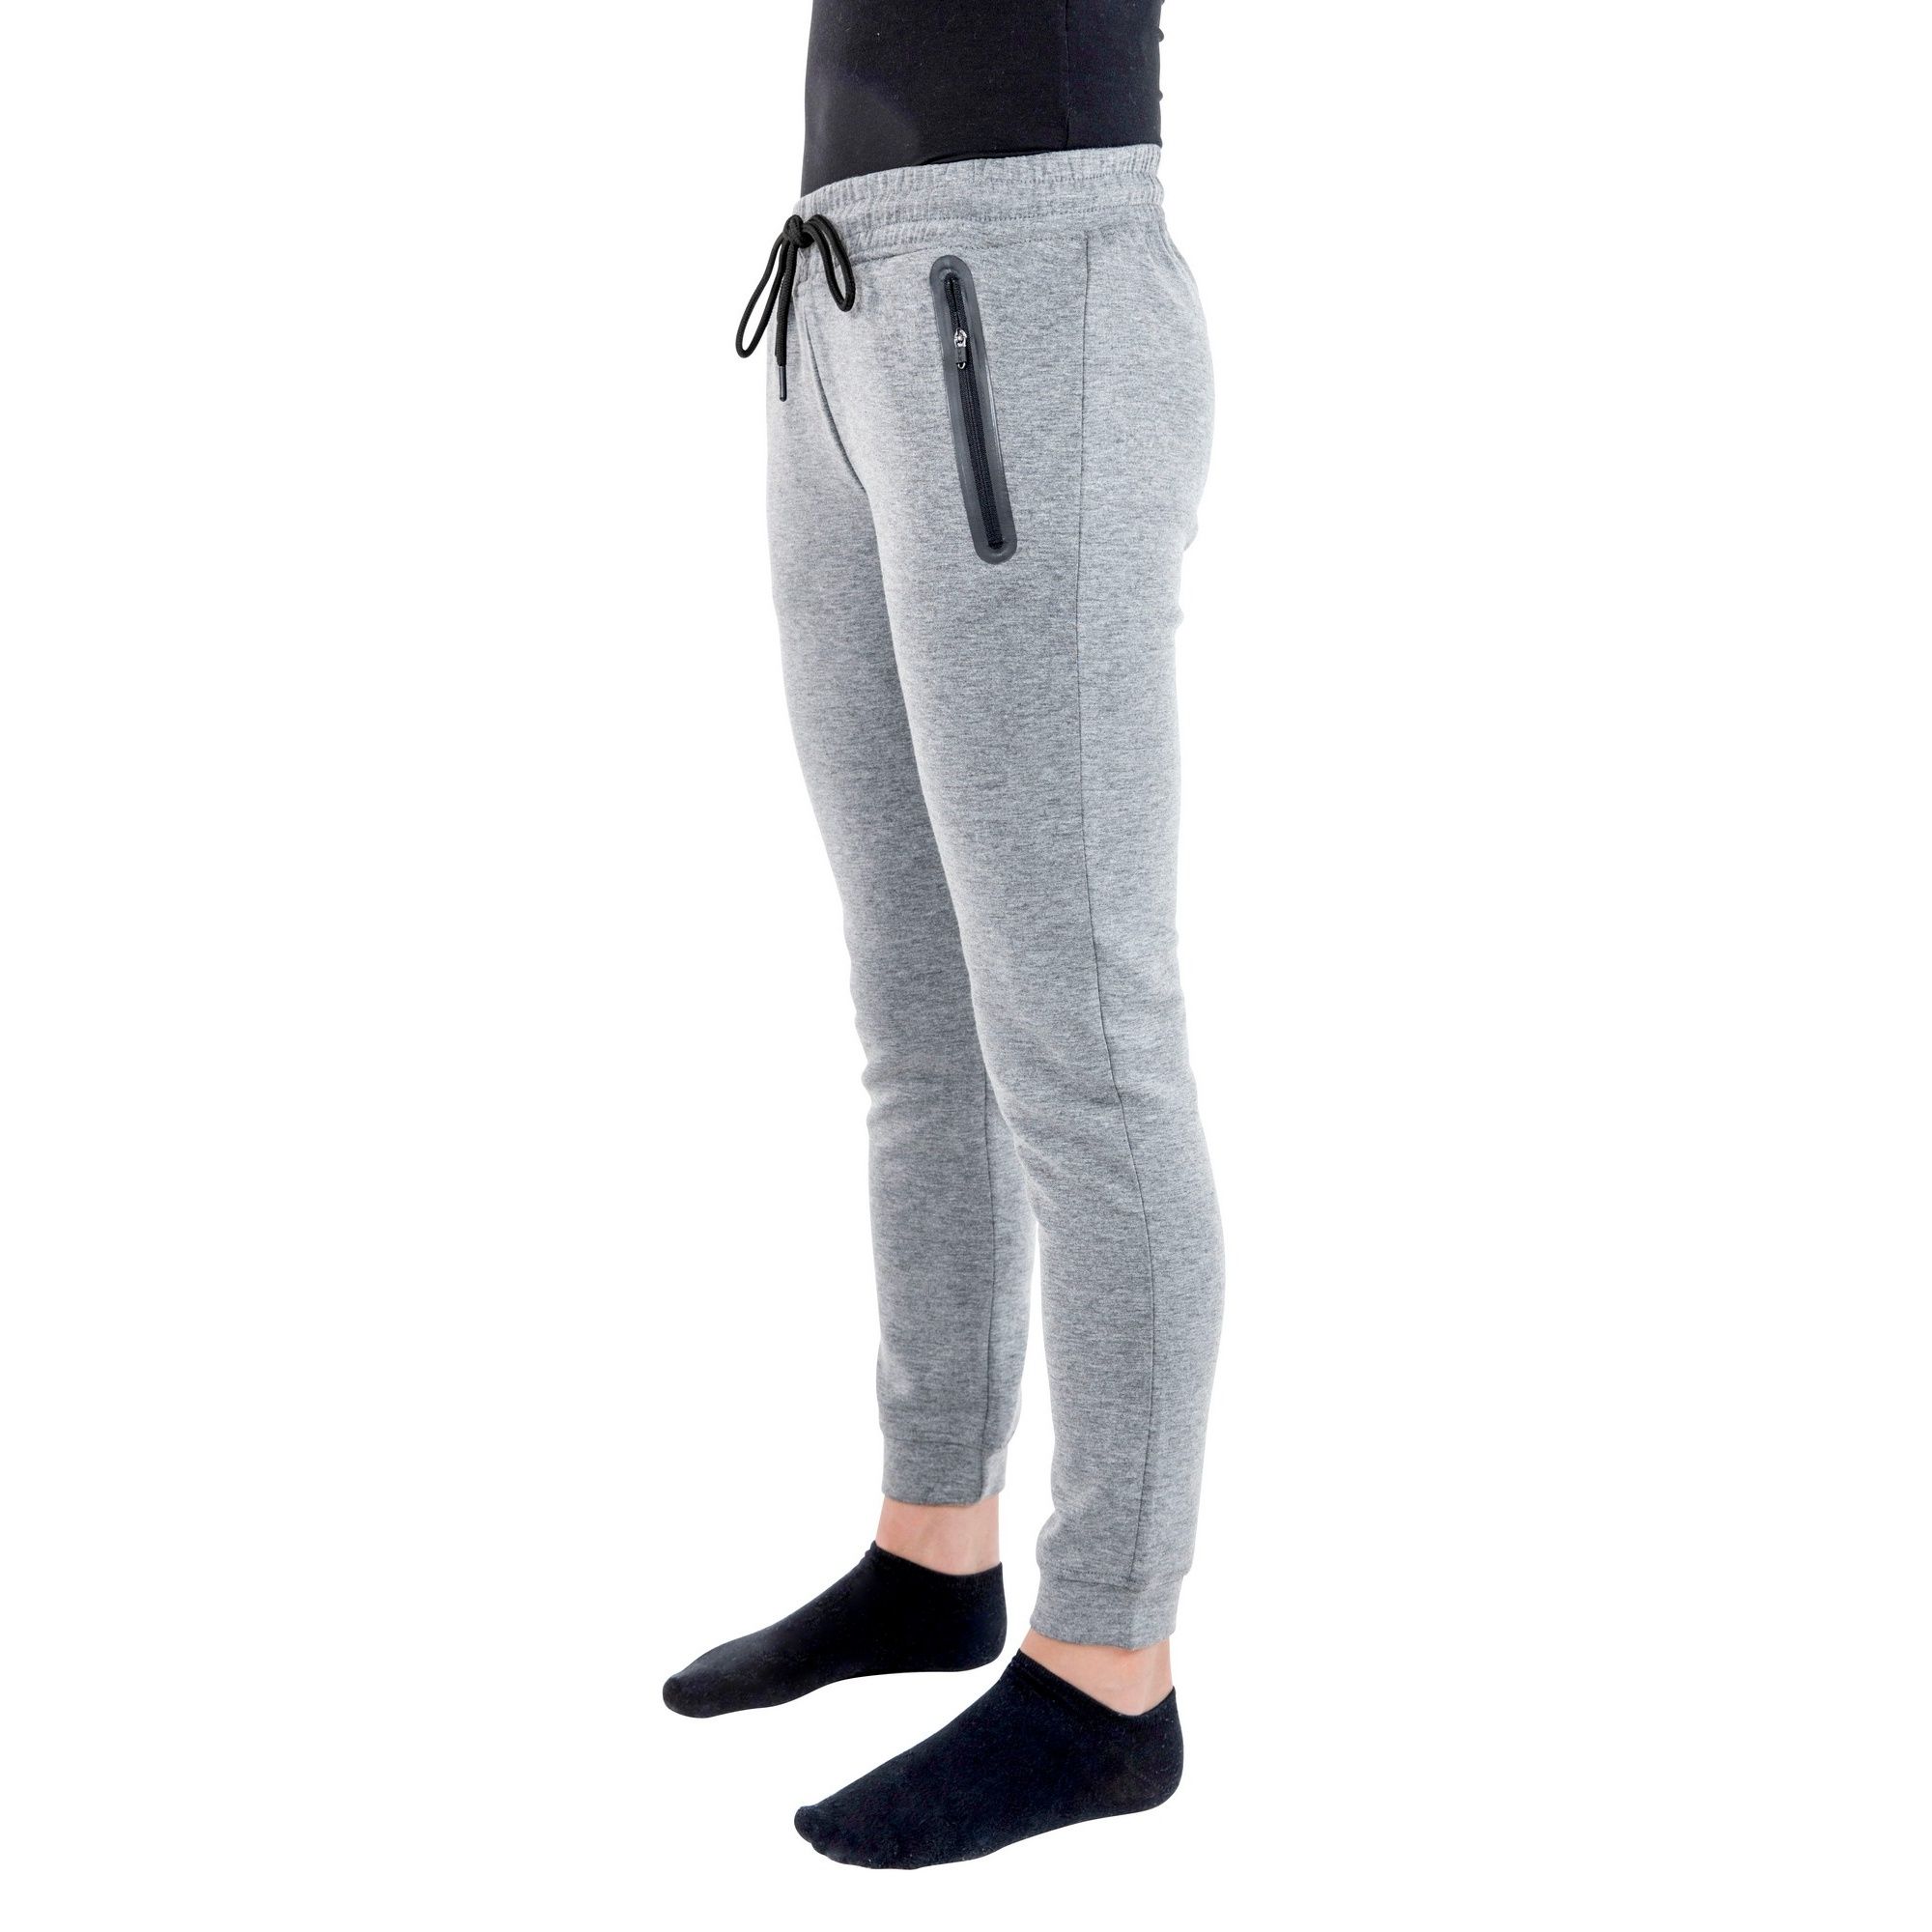 Womens athletic pants. Waistband with drawcord adjustment. 2 zipped pockets. Cuff detail at ankle. Materials: 75% Polyester/ 22% Rayon/ 3% Elastane.